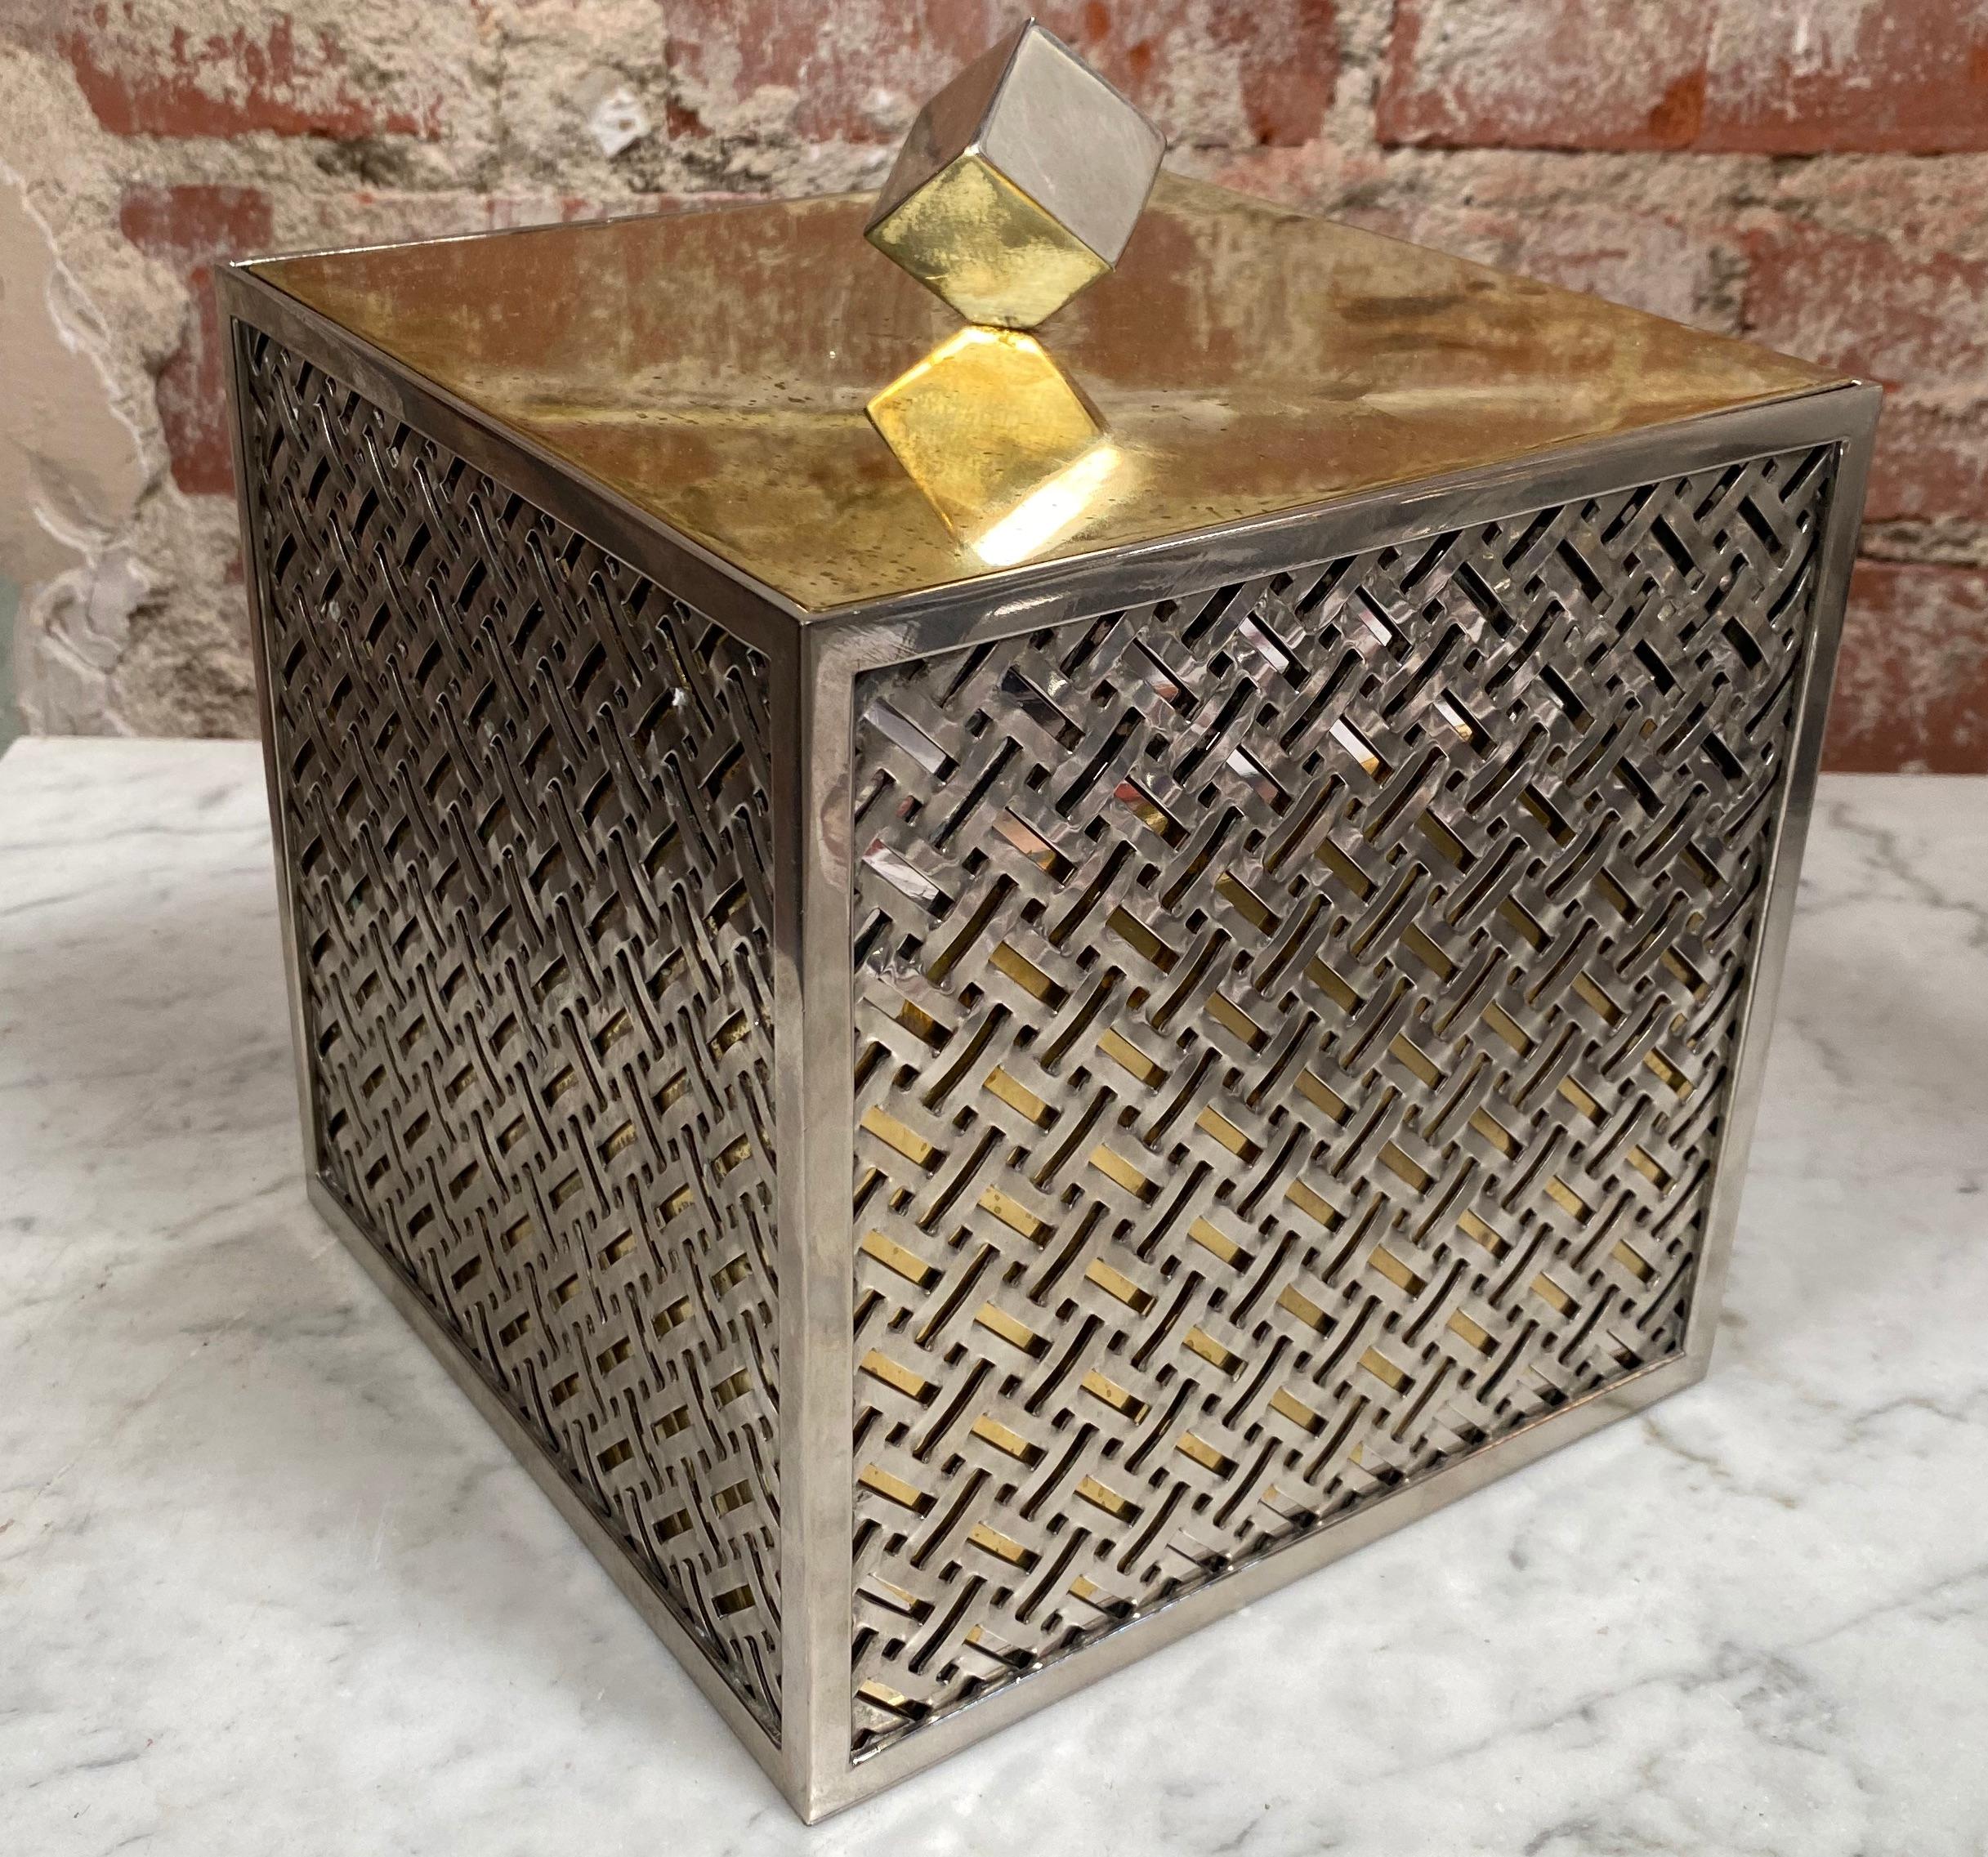 Vintage ice bucket made with brass chrome and plastic with cube detail on top.